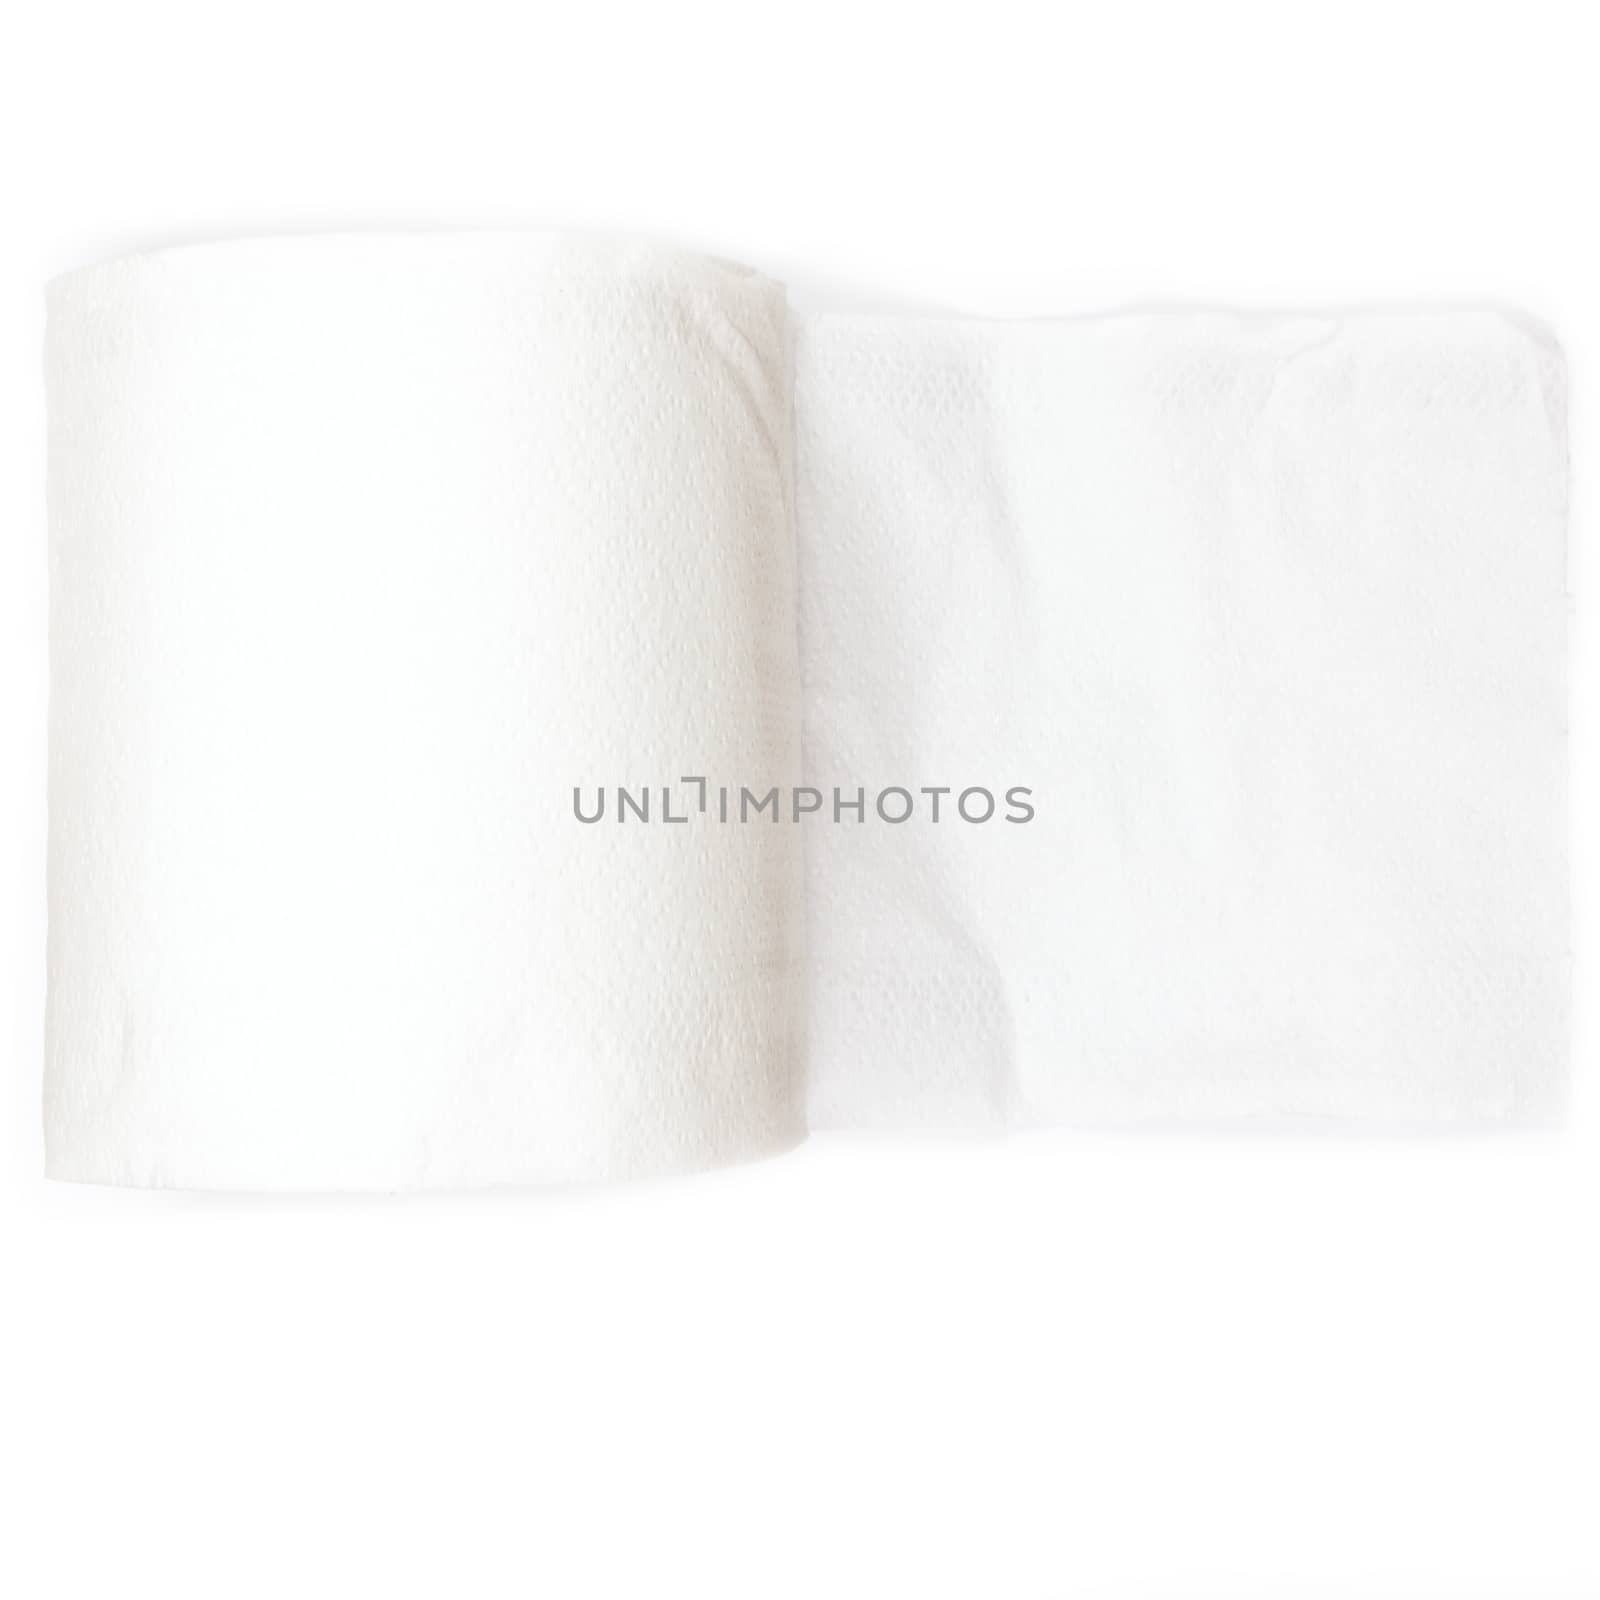 Toilet paper on white background by wyoosumran